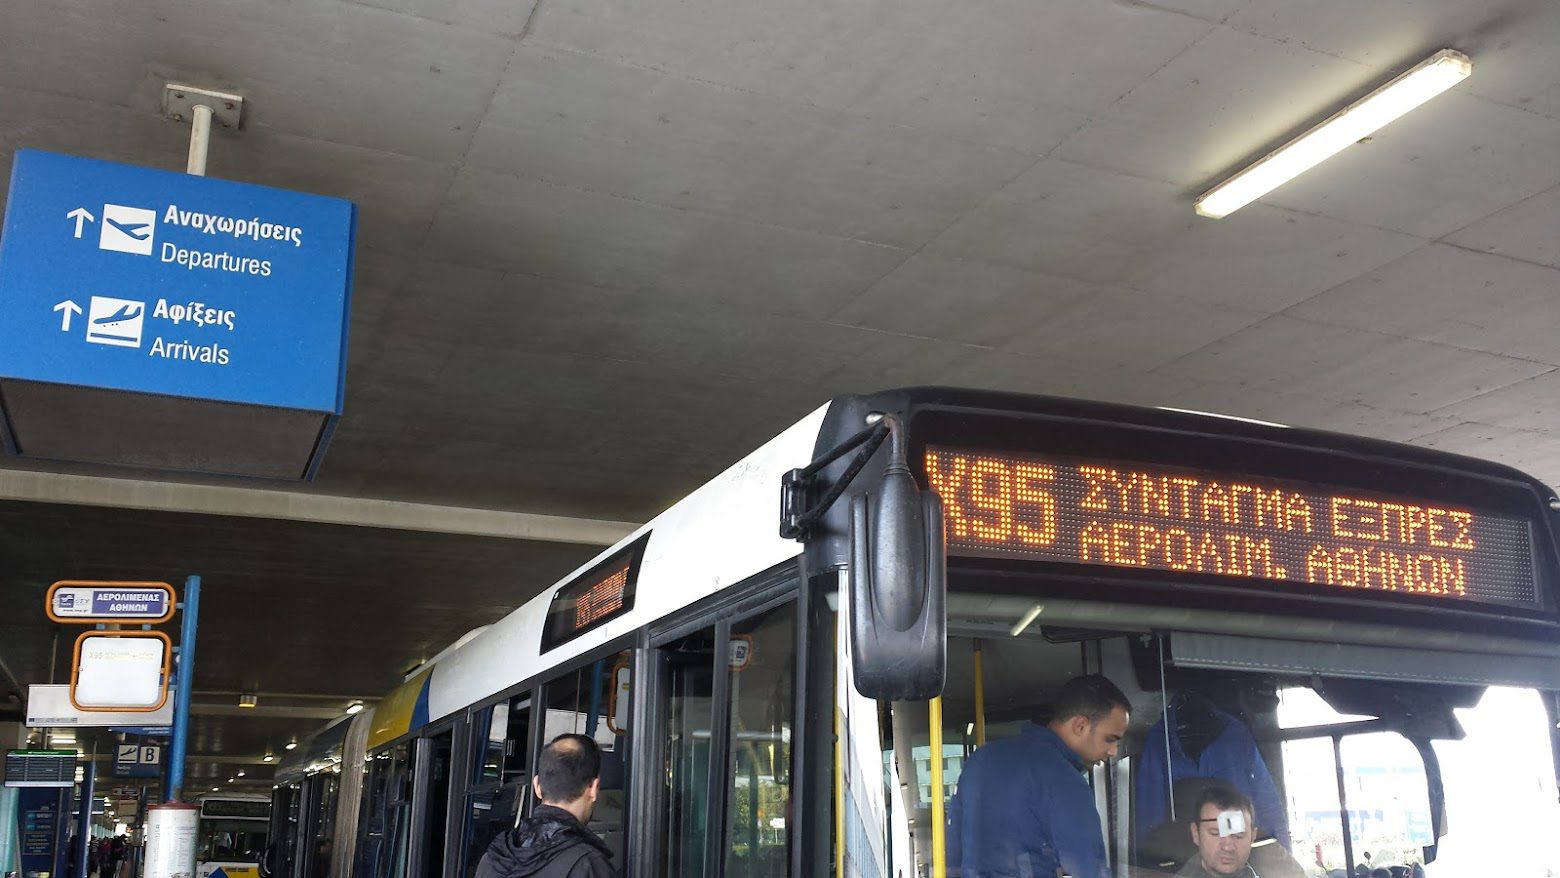 Taking the X95 bus from Athens airport